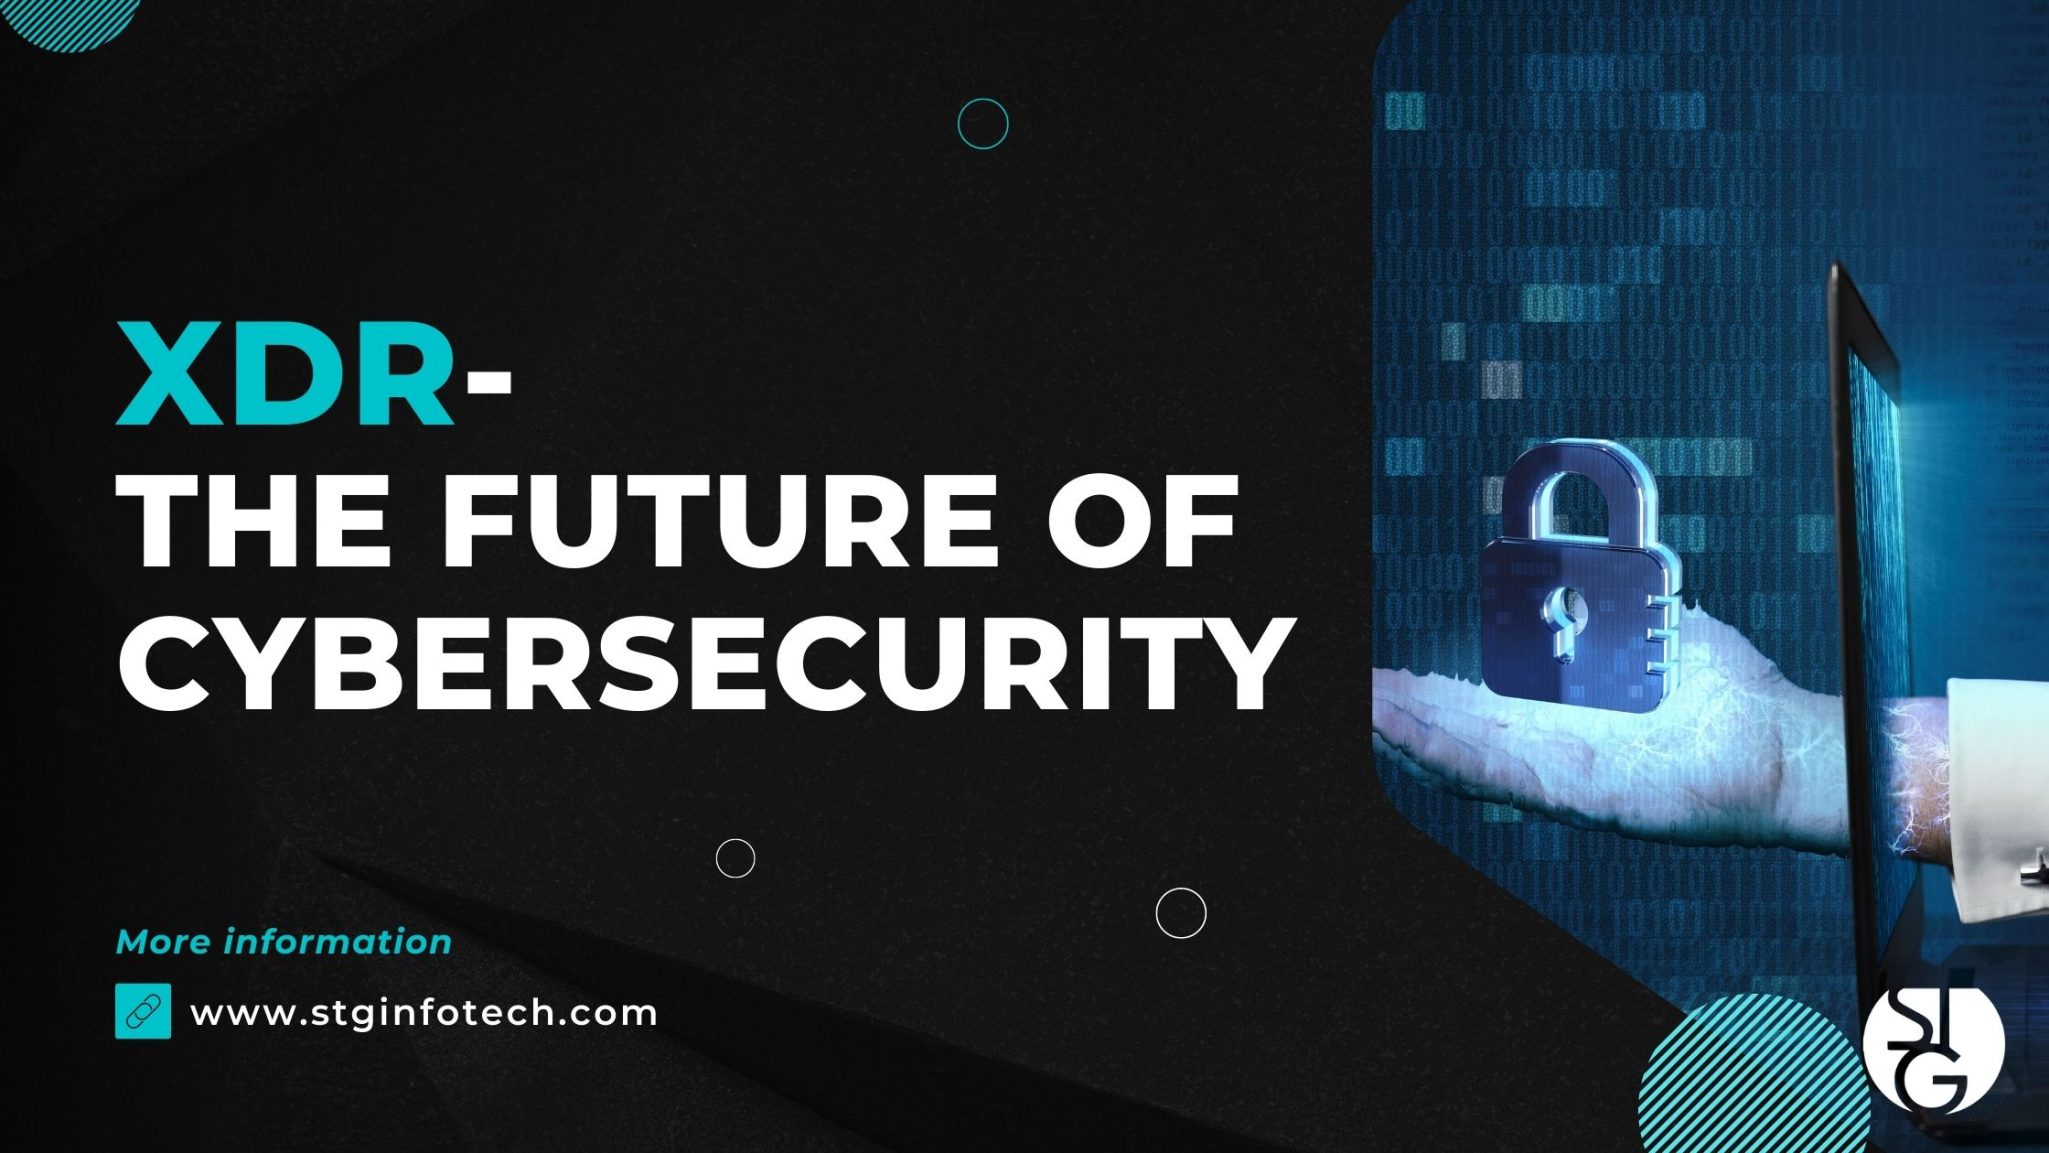 XDR - The Future of Cybersecurity